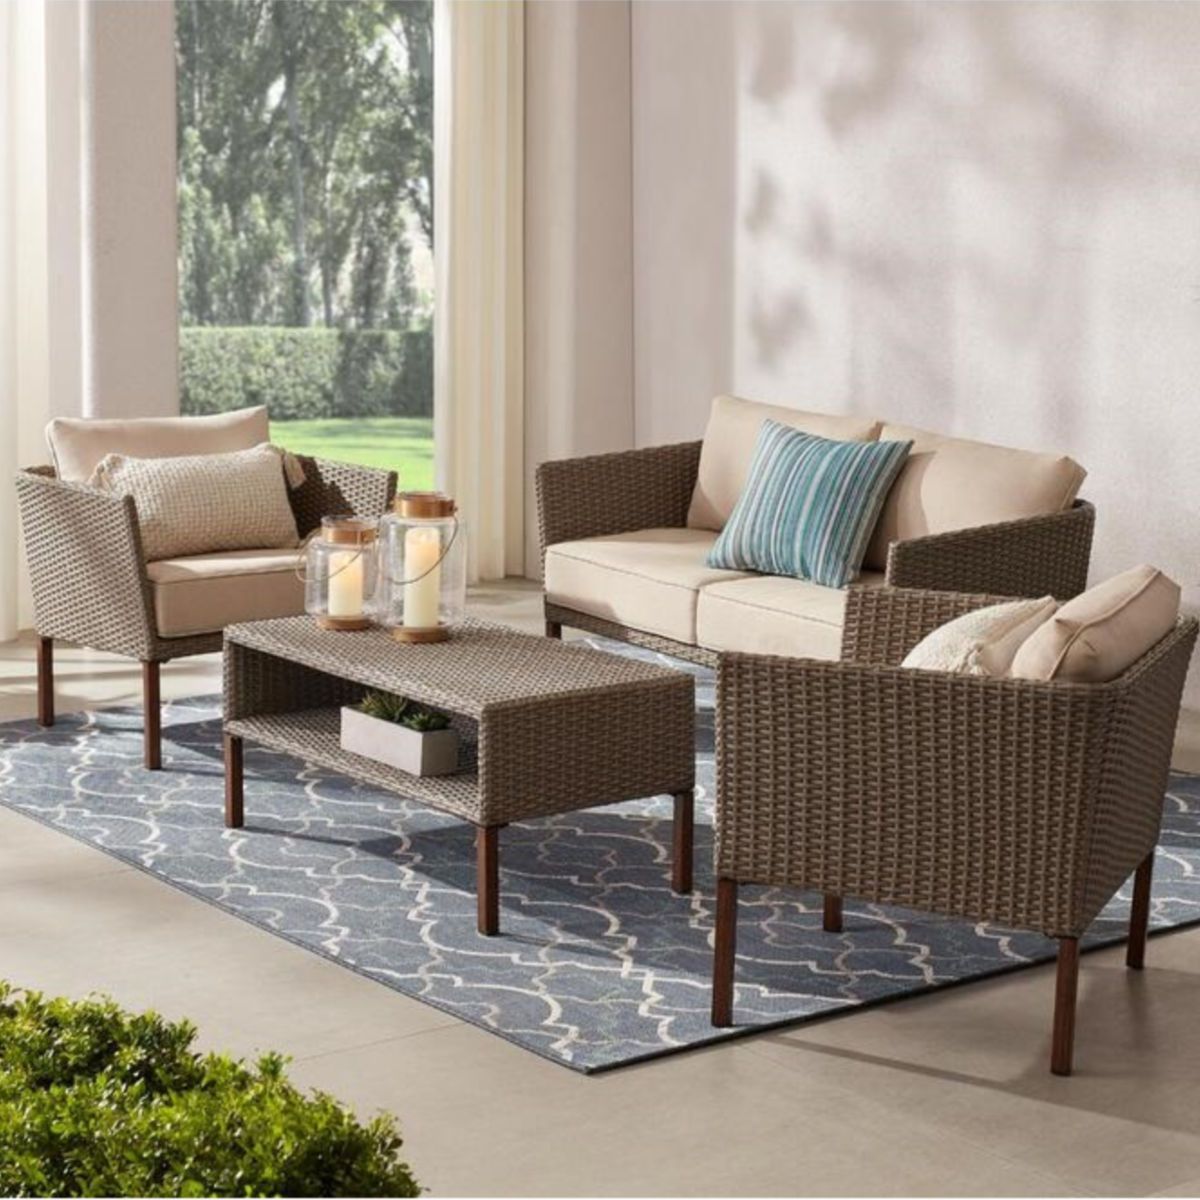 Hampton Bay Oakshire 4Pc Patio Conversation Set $399 (20% Off) @ Home Depot Within 4 Piece Outdoor Seating Patio Sets (View 5 of 15)